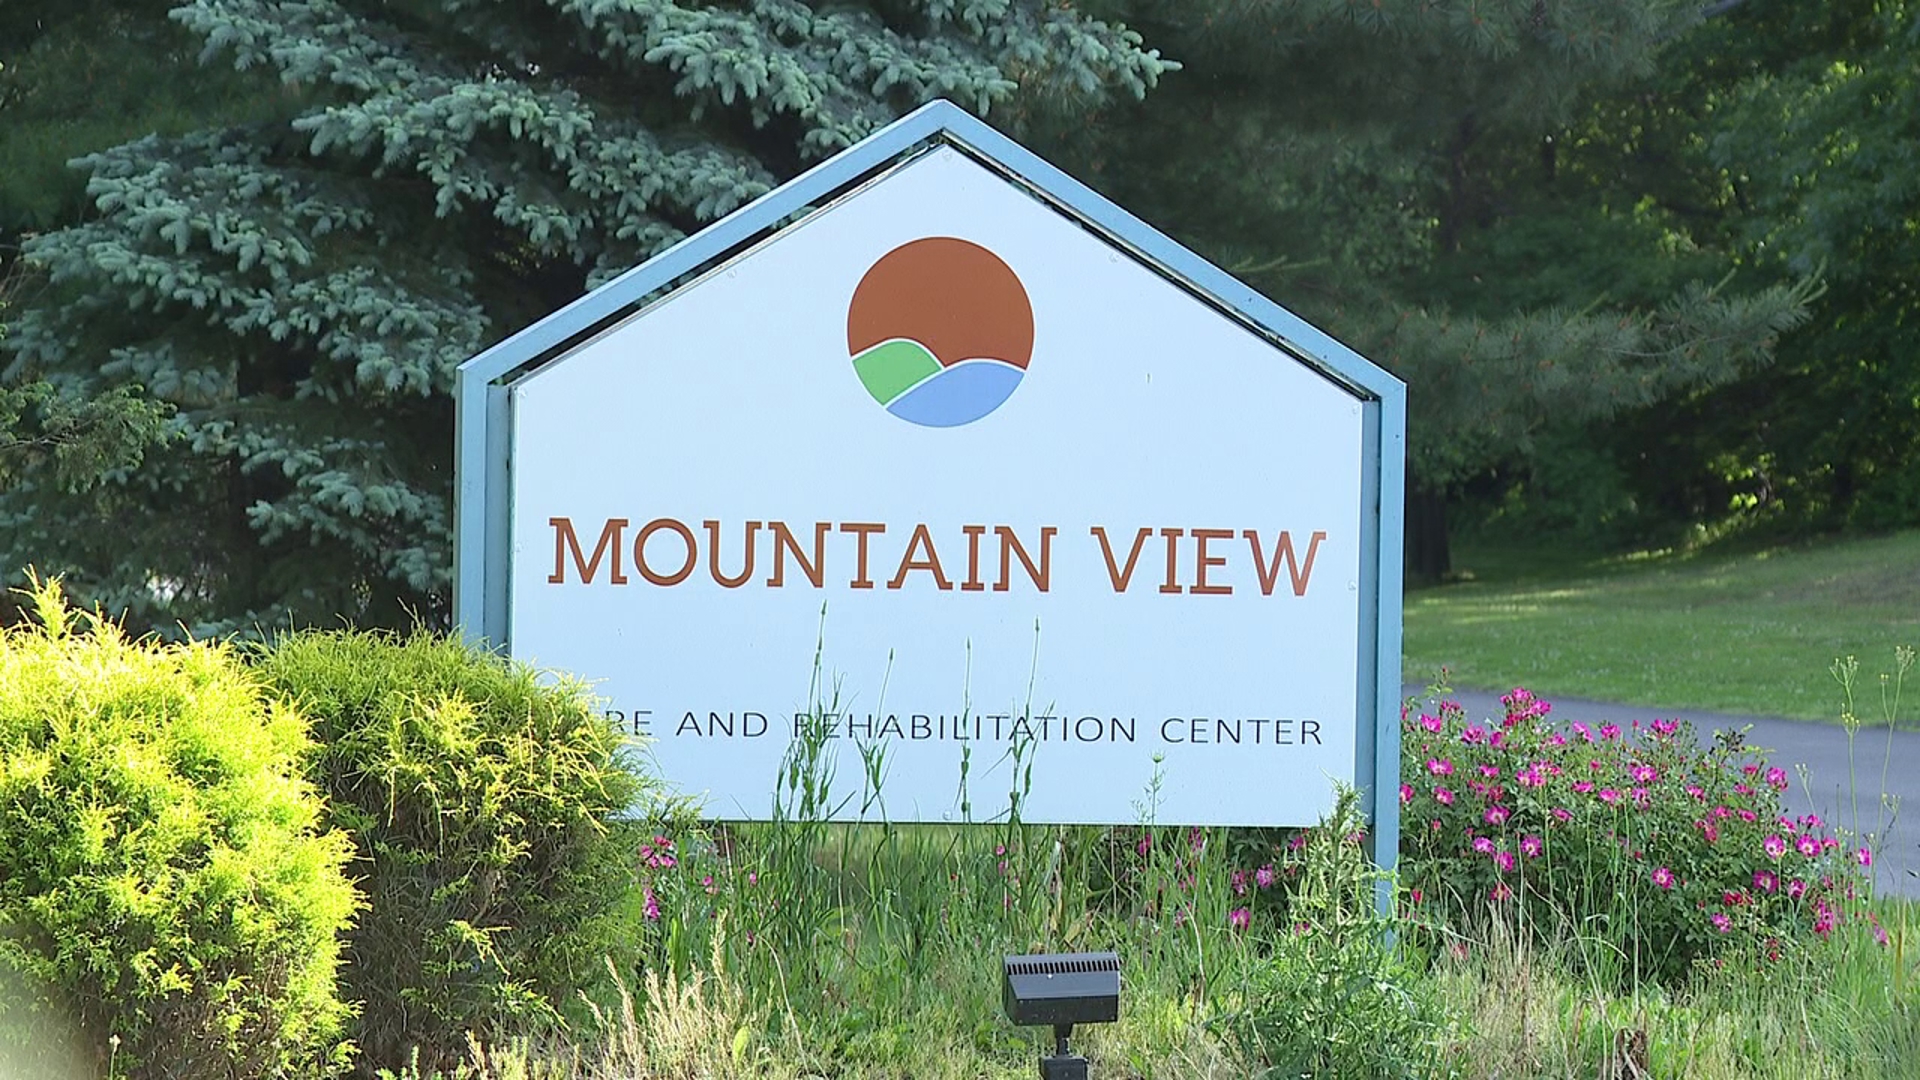 Mountain View Nursing and Rehabilitation are in an emergency relocation process on Friday due to the risk to residents' health and safety.